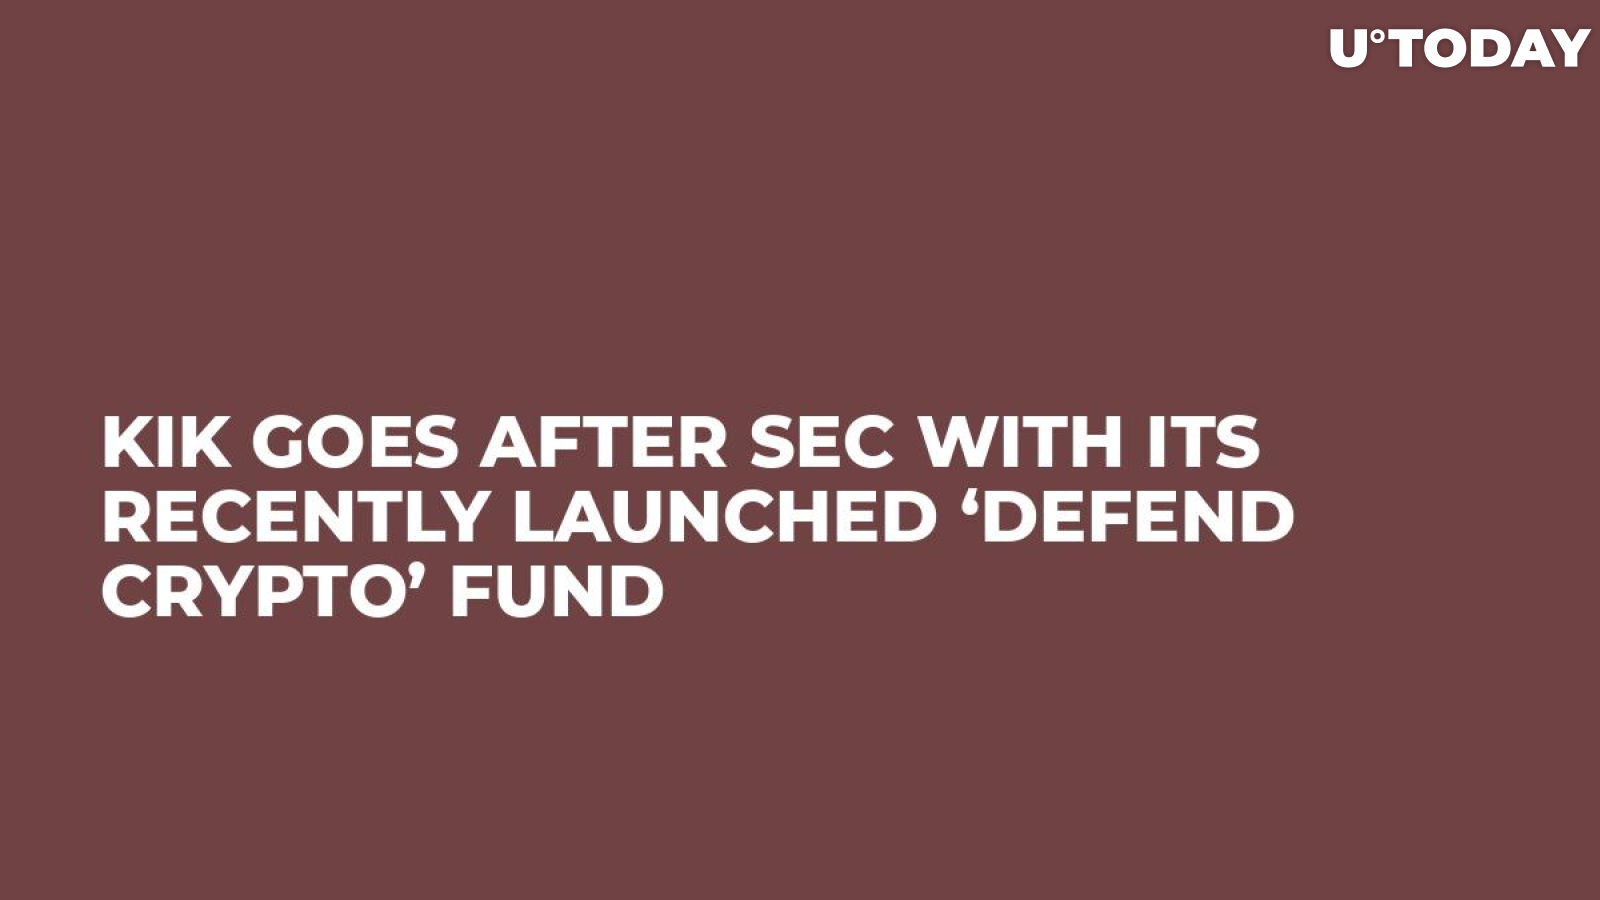 Kik Goes After SEC with Its Recently Launched ‘Defend Crypto’ Fund